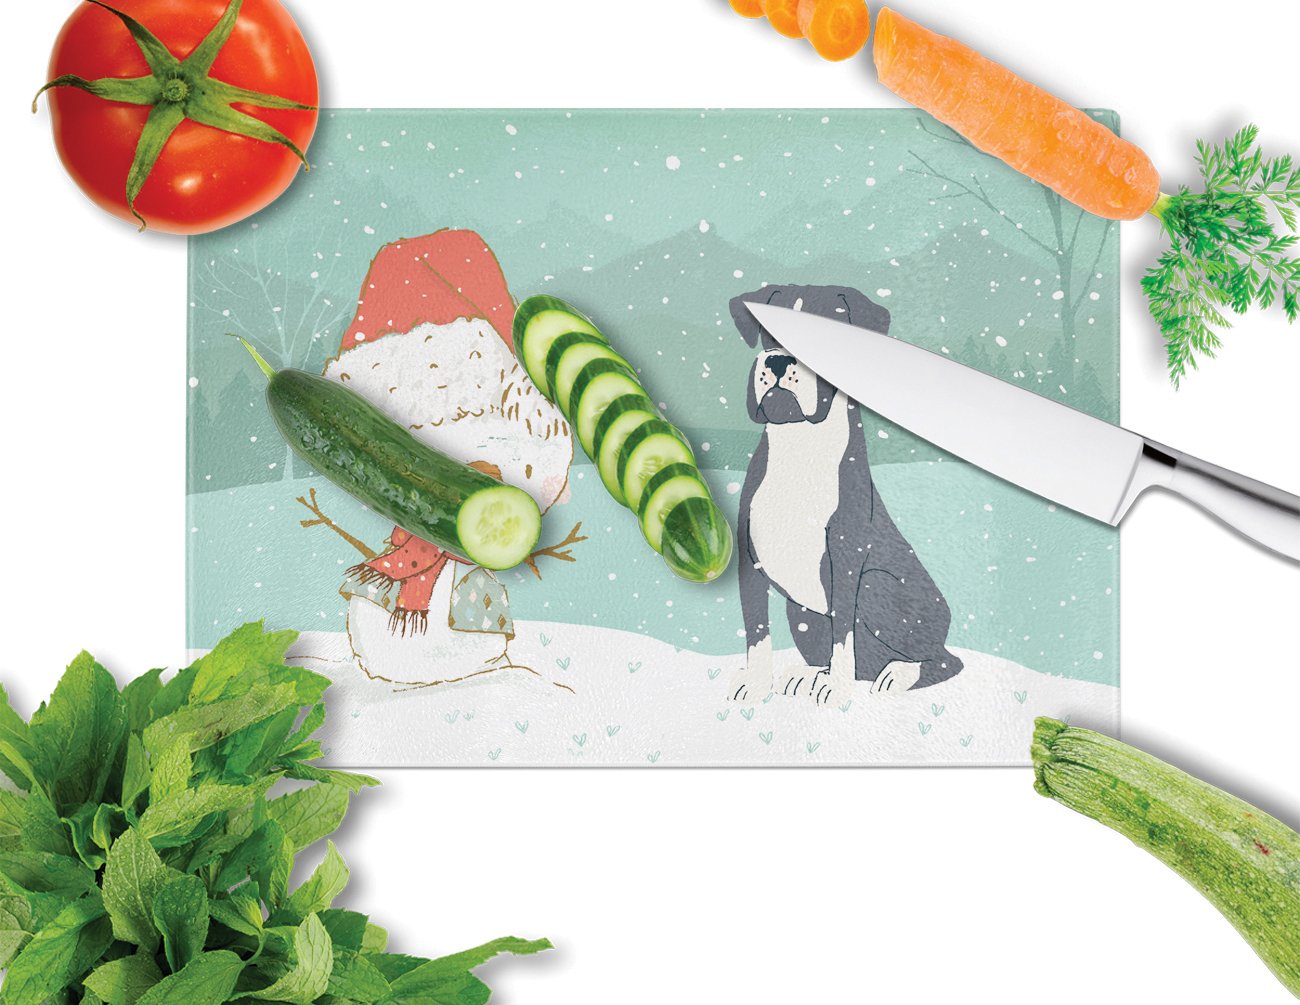 Black Boxer and Snowman Christmas Glass Cutting Board Large CK2035LCB by Caroline's Treasures